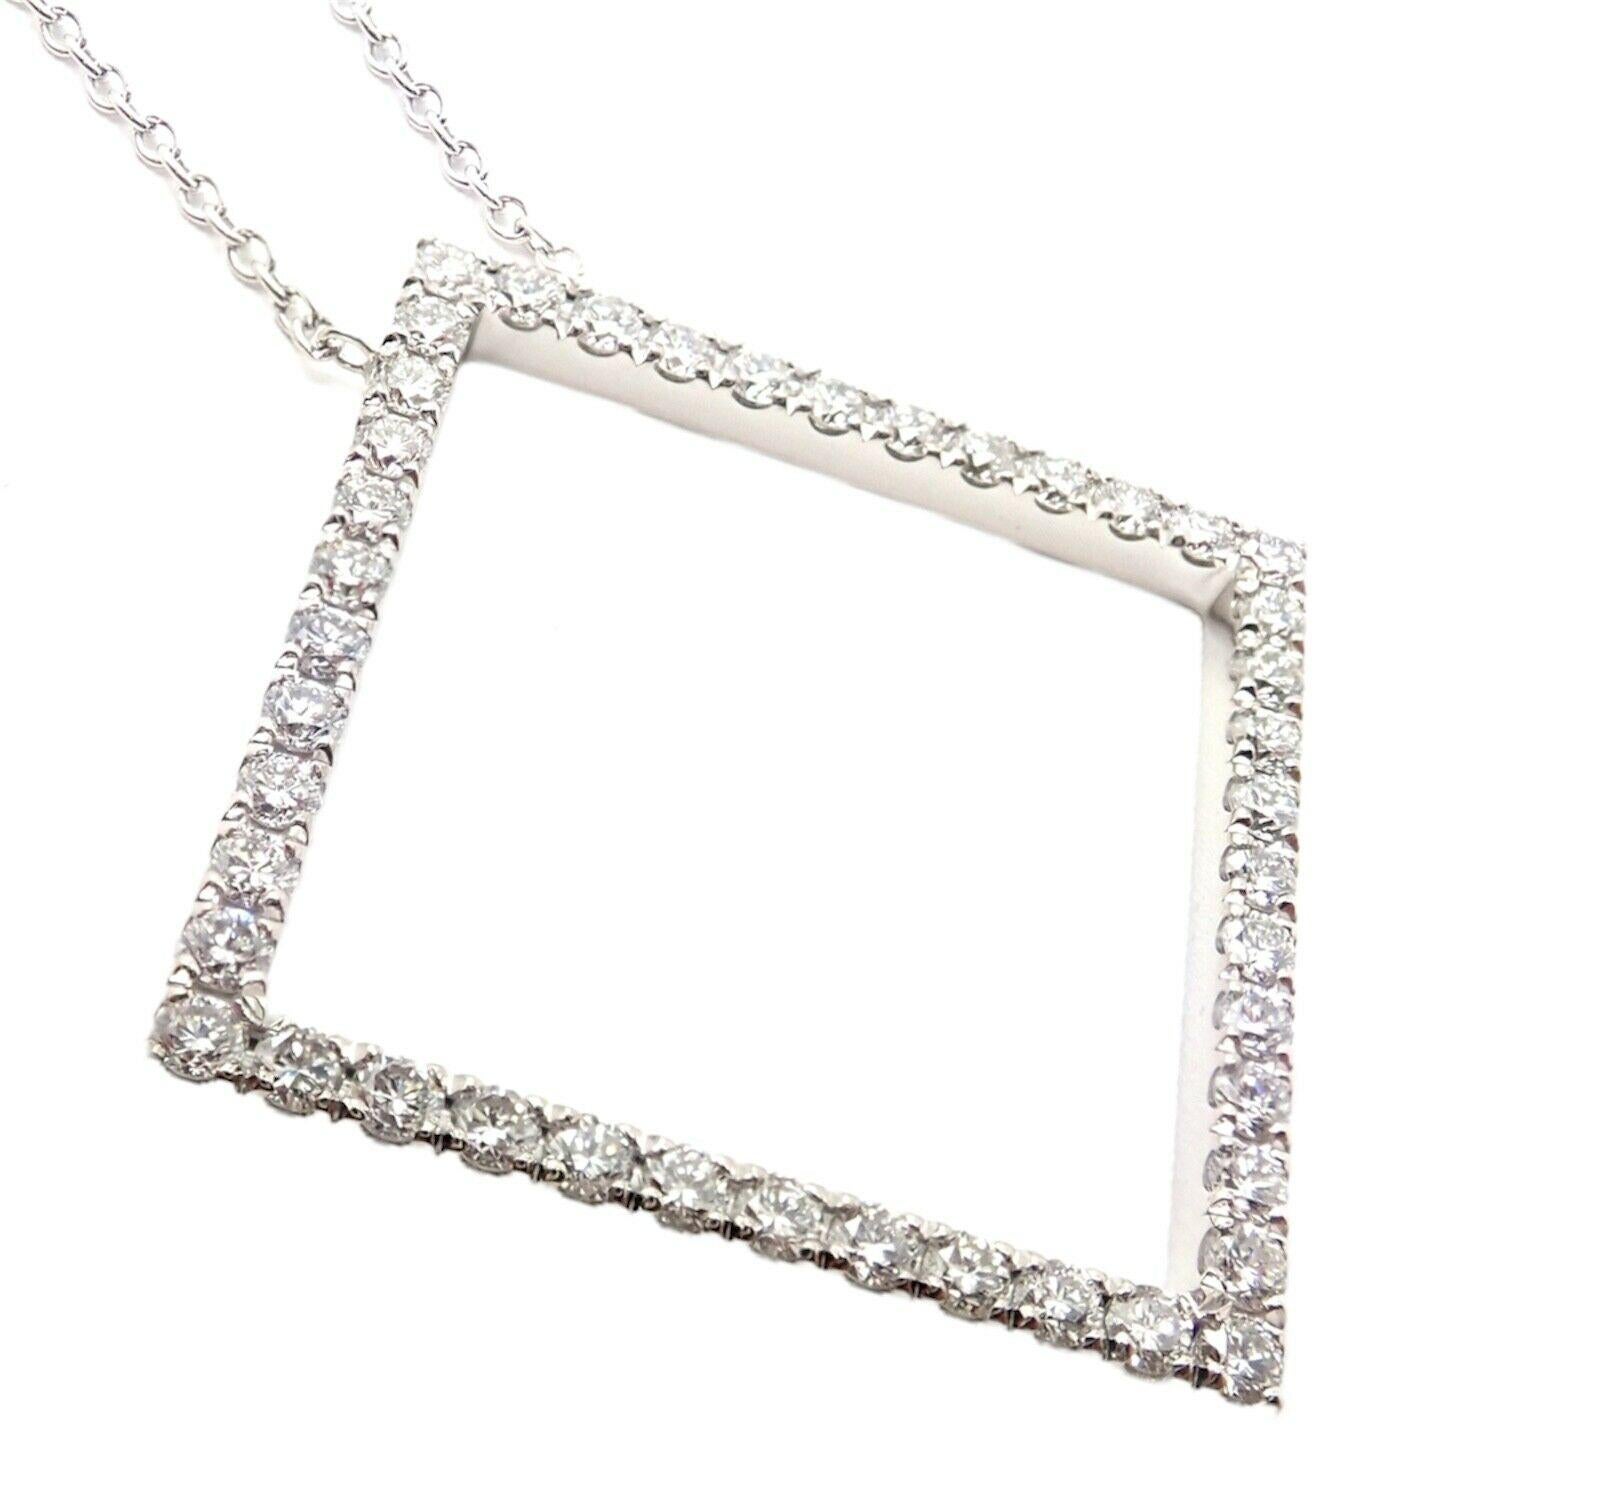 18k White Gold Diamond Square Pendant Necklace by Tiffany & Co. Belgium
With 43 Diamonds VS1 clarity, G color total weight approx. .50ct
Details:
Length: 16